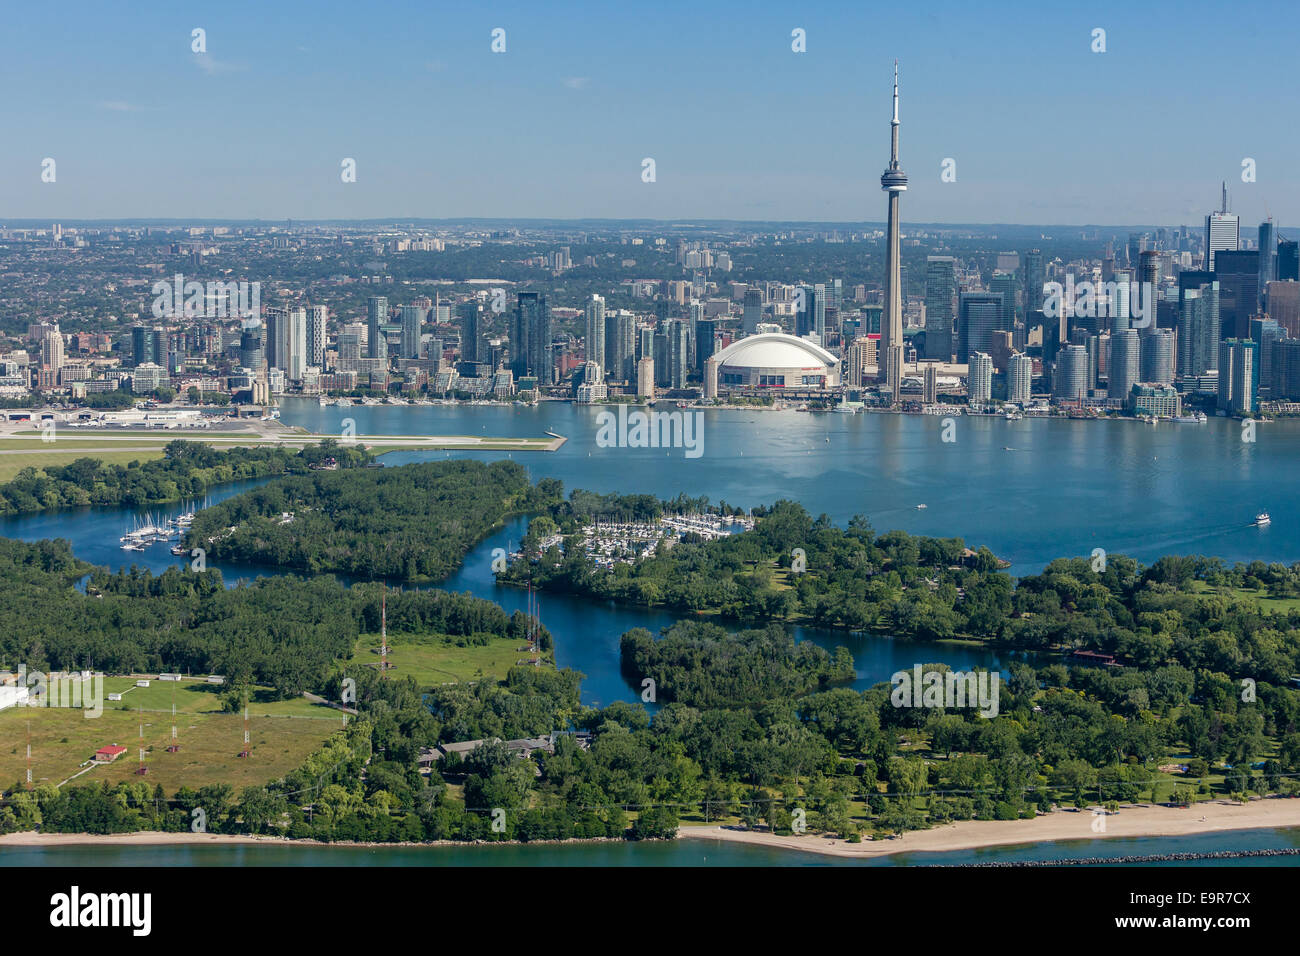 Aerial view of Toronto skyline with Islands in the foreground. Stock Photo